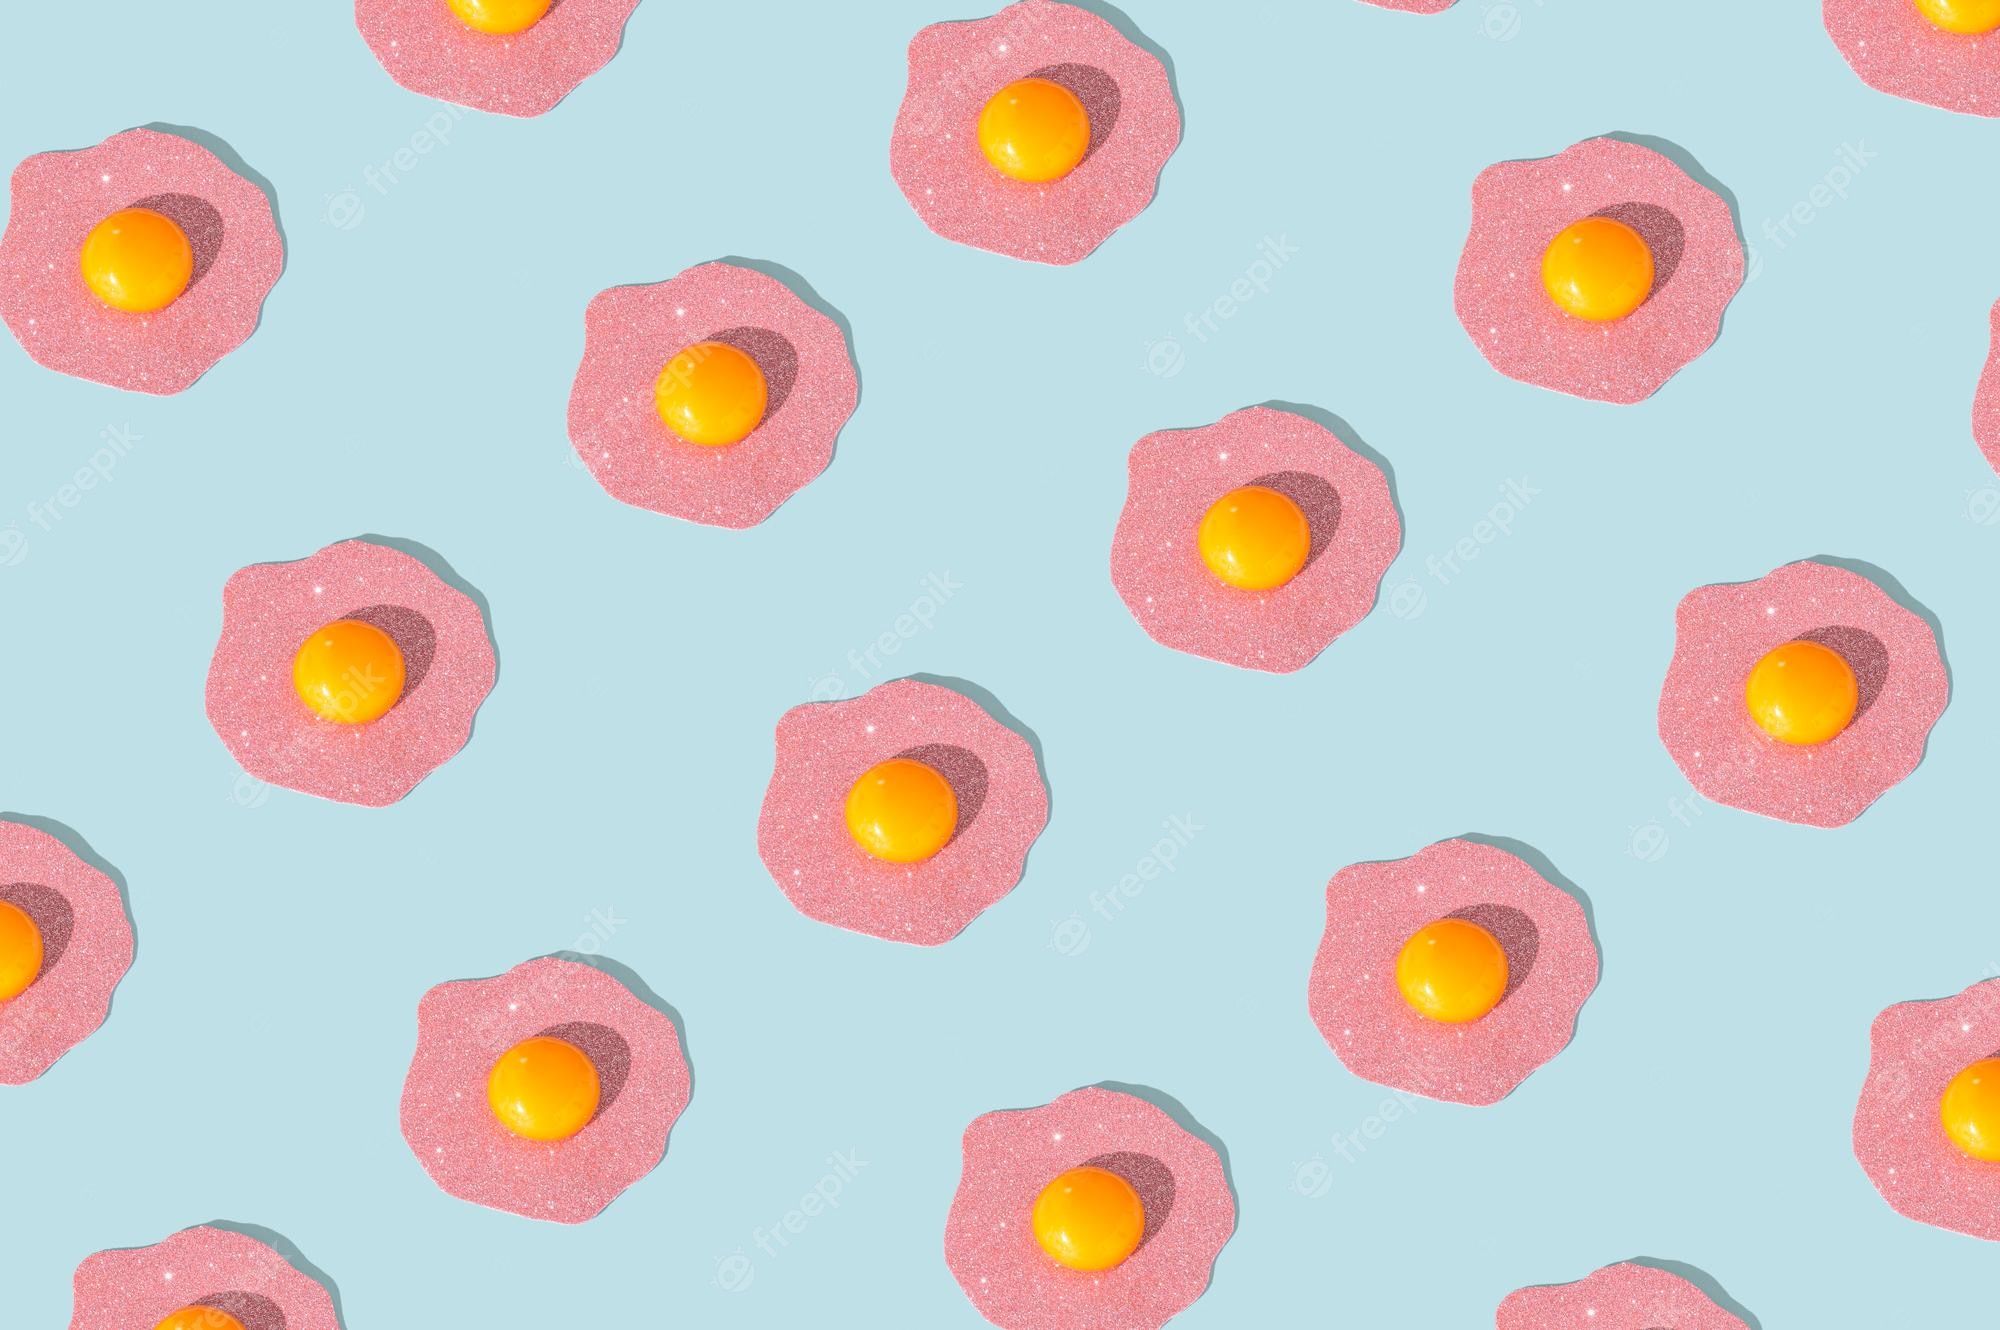 Fried eggs pattern made of pink sugar on a pastel blue background. - Egg